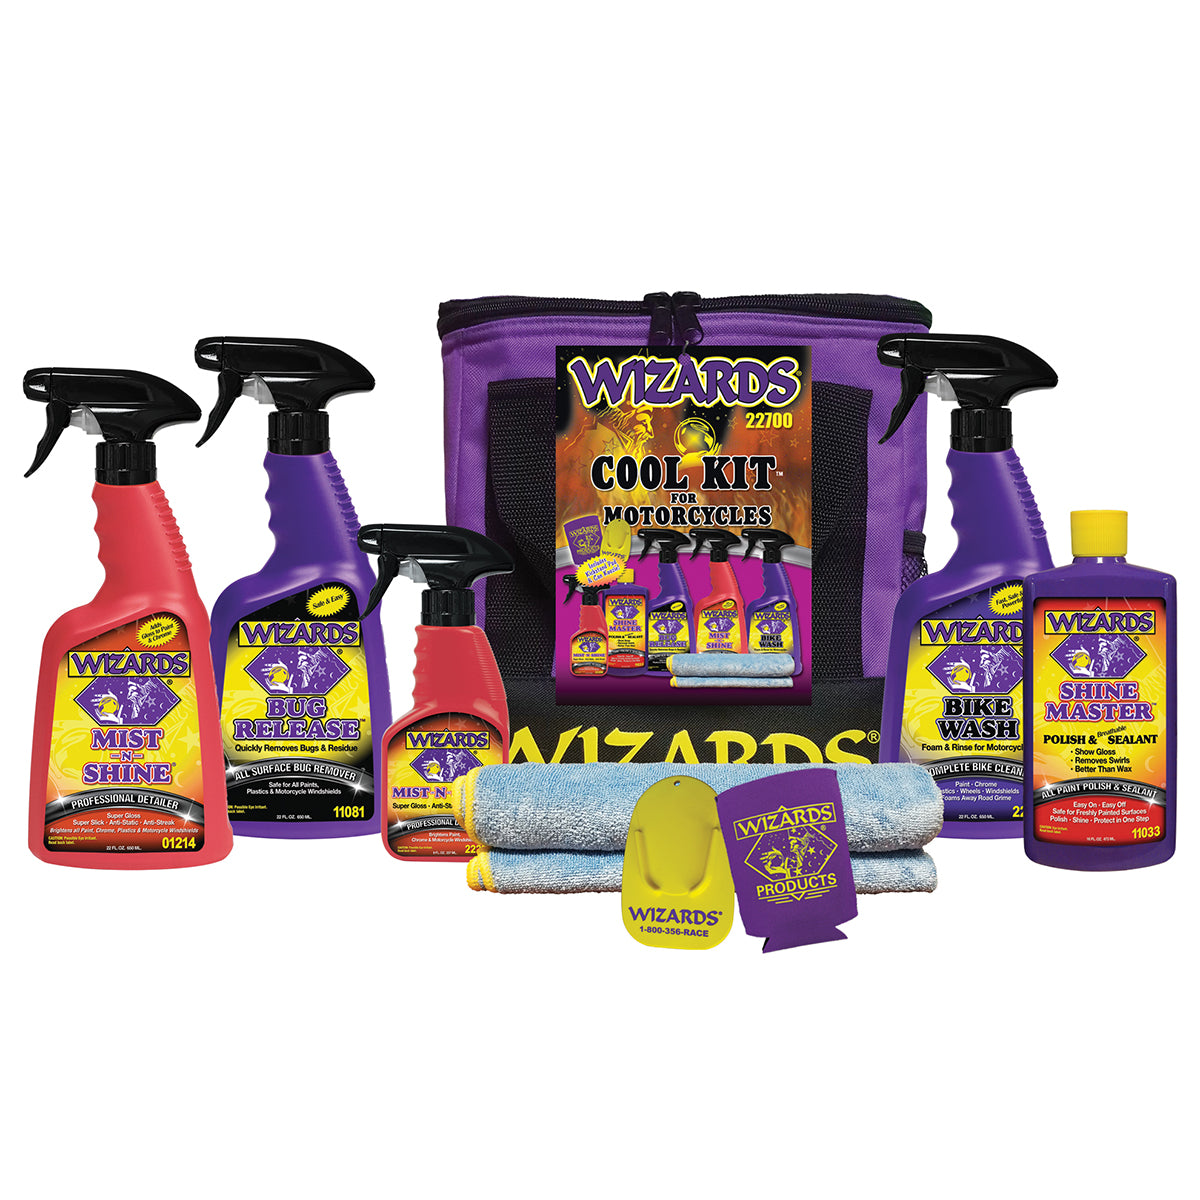 Motorcycle Cool Kit (9 piece) – Wizards Products - All rights